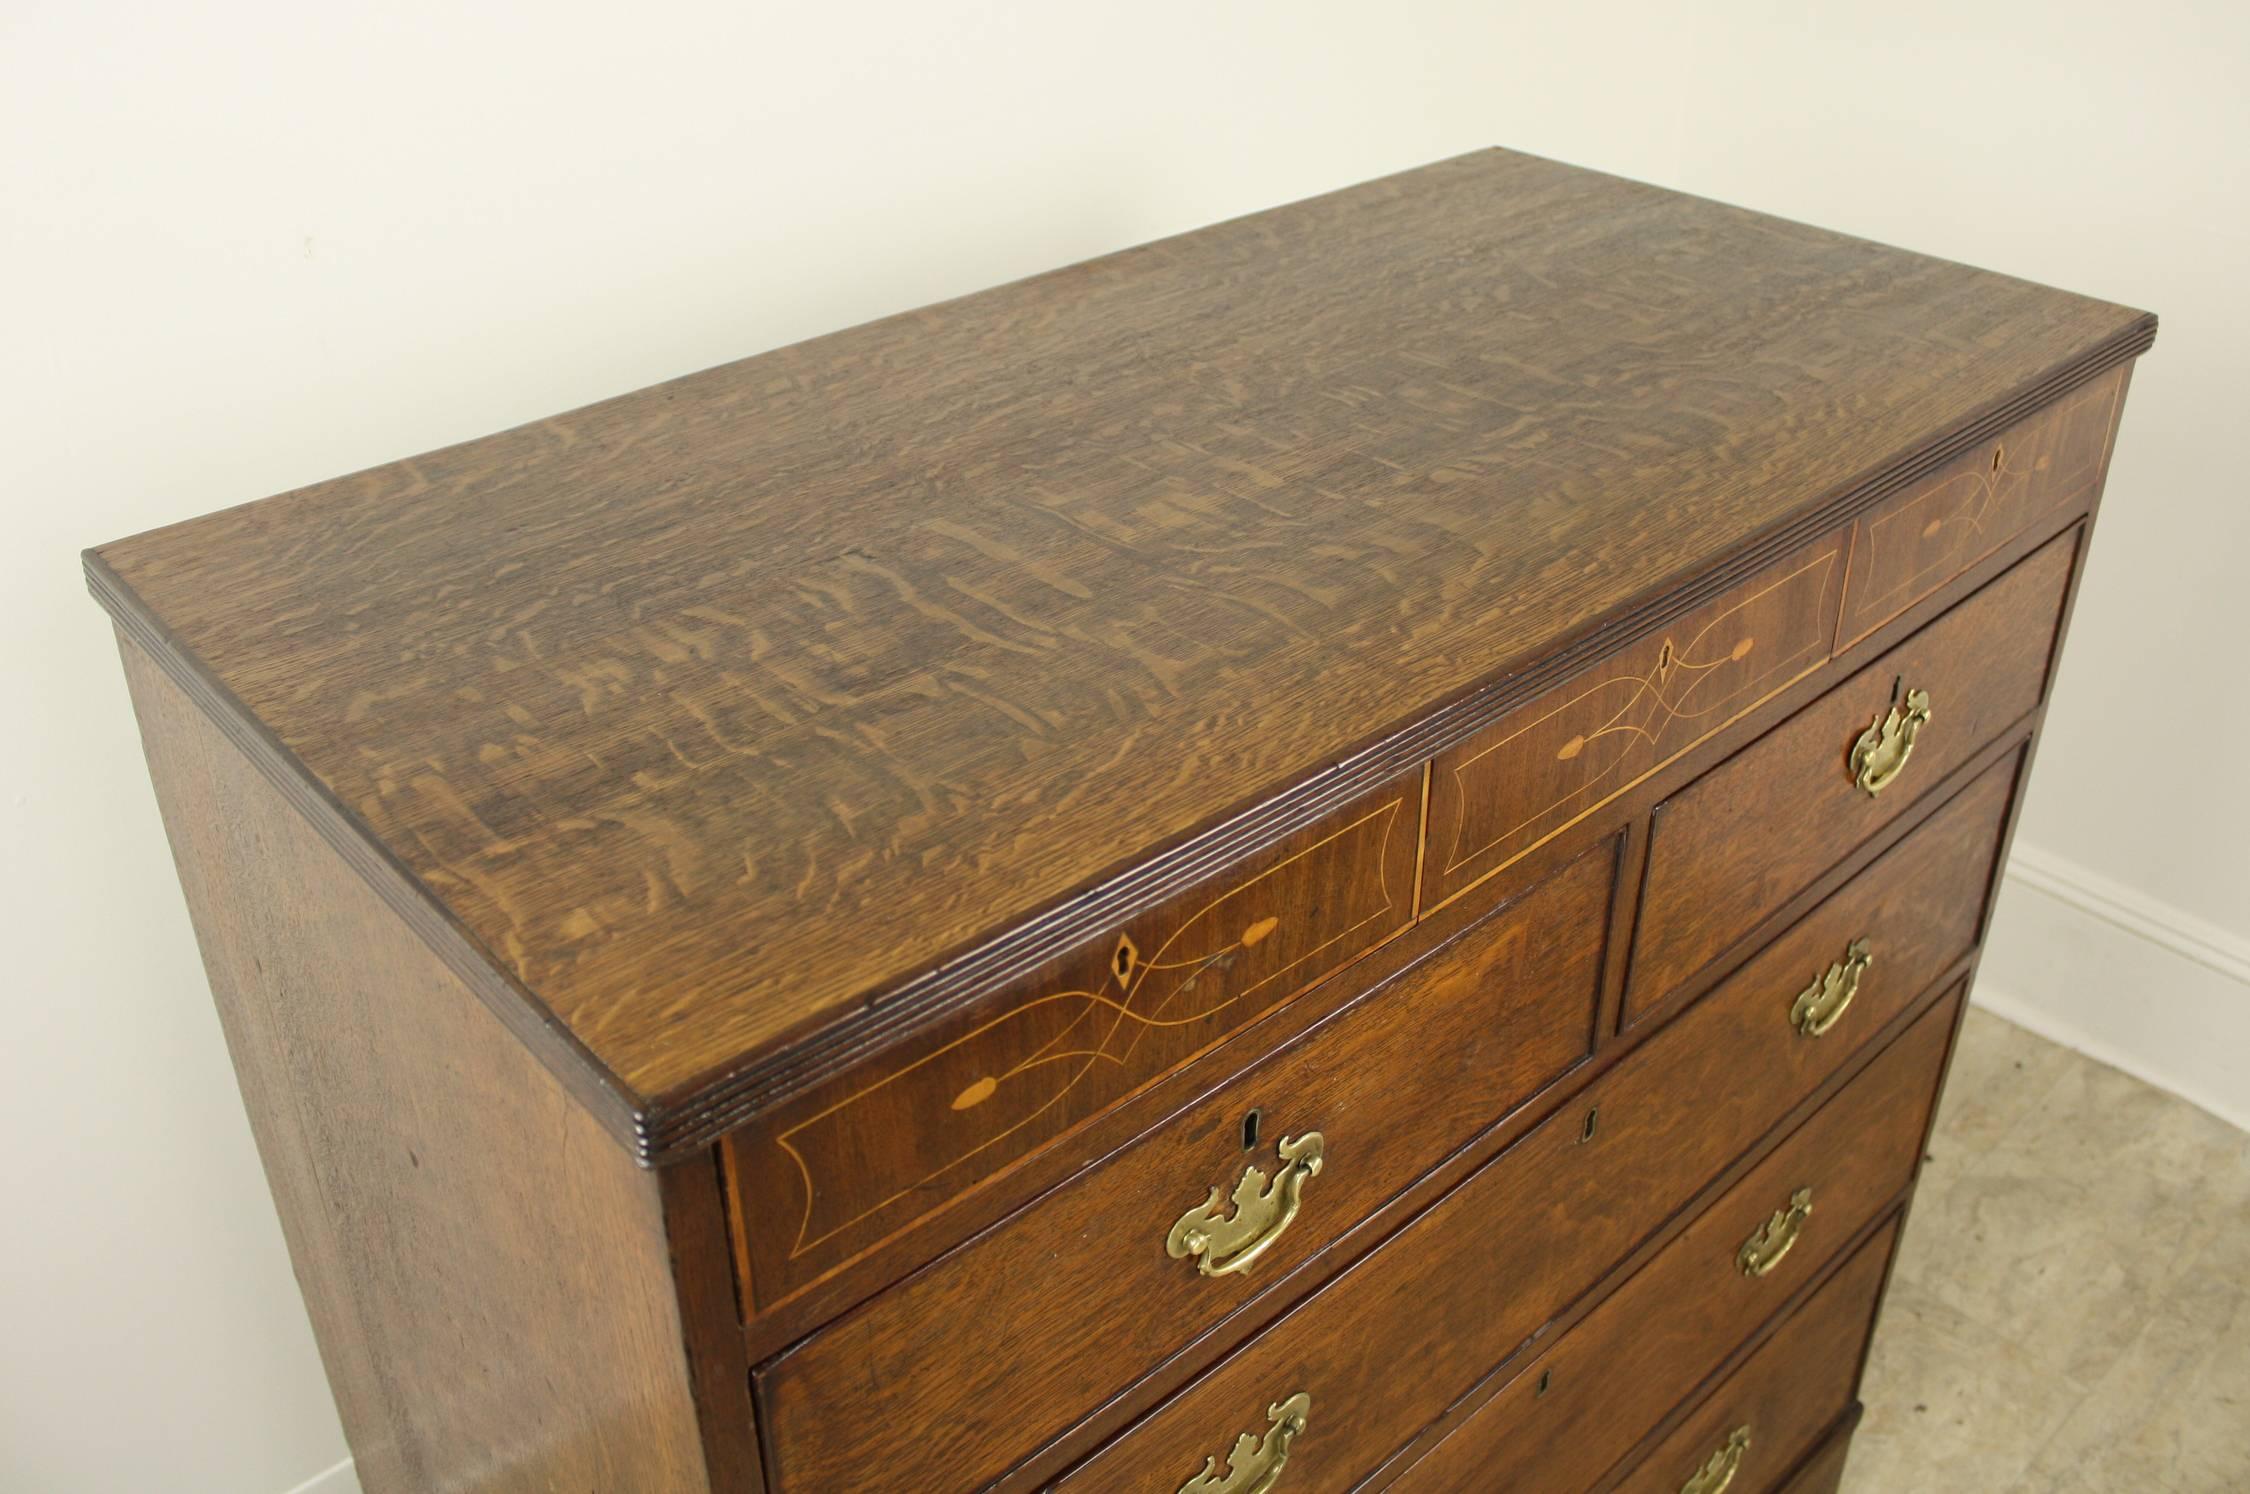 Early 19th Century Formal Georgian Oak Chest of Drawers with Satinwood Inlay